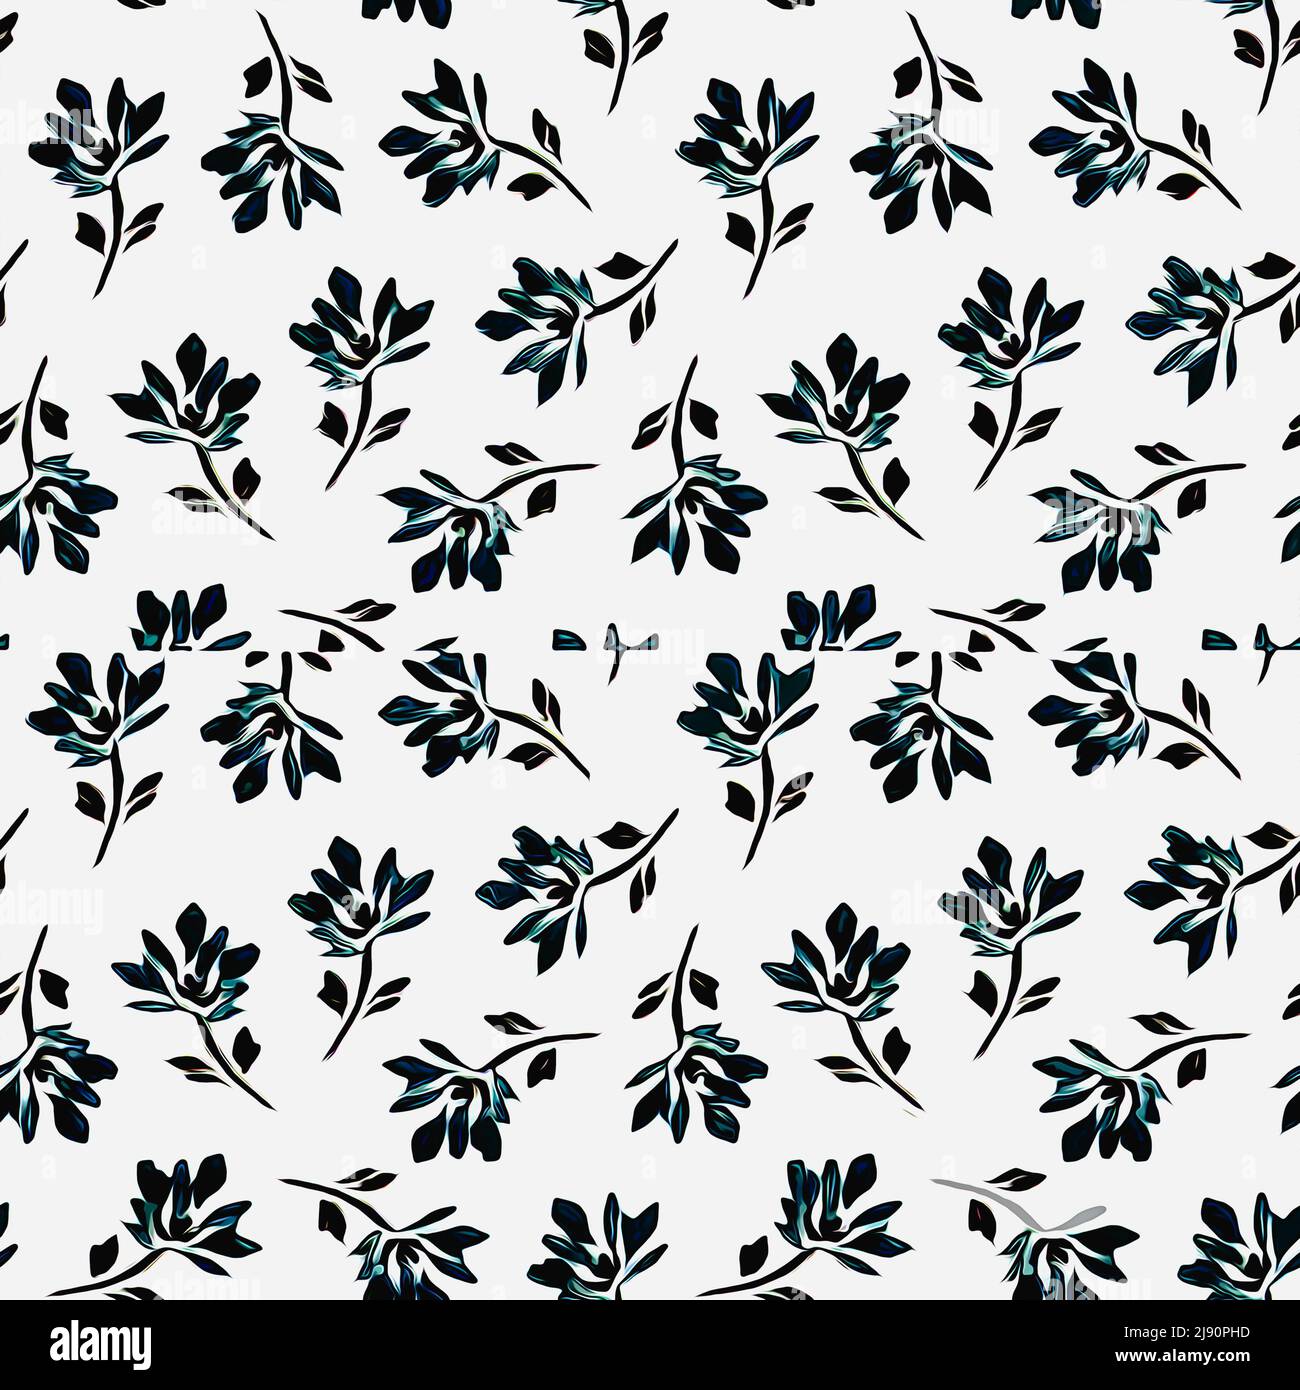 Textile and wallpaper patterns. A printable digital illustration work. Floral  Print designs Stock Photo - Alamy